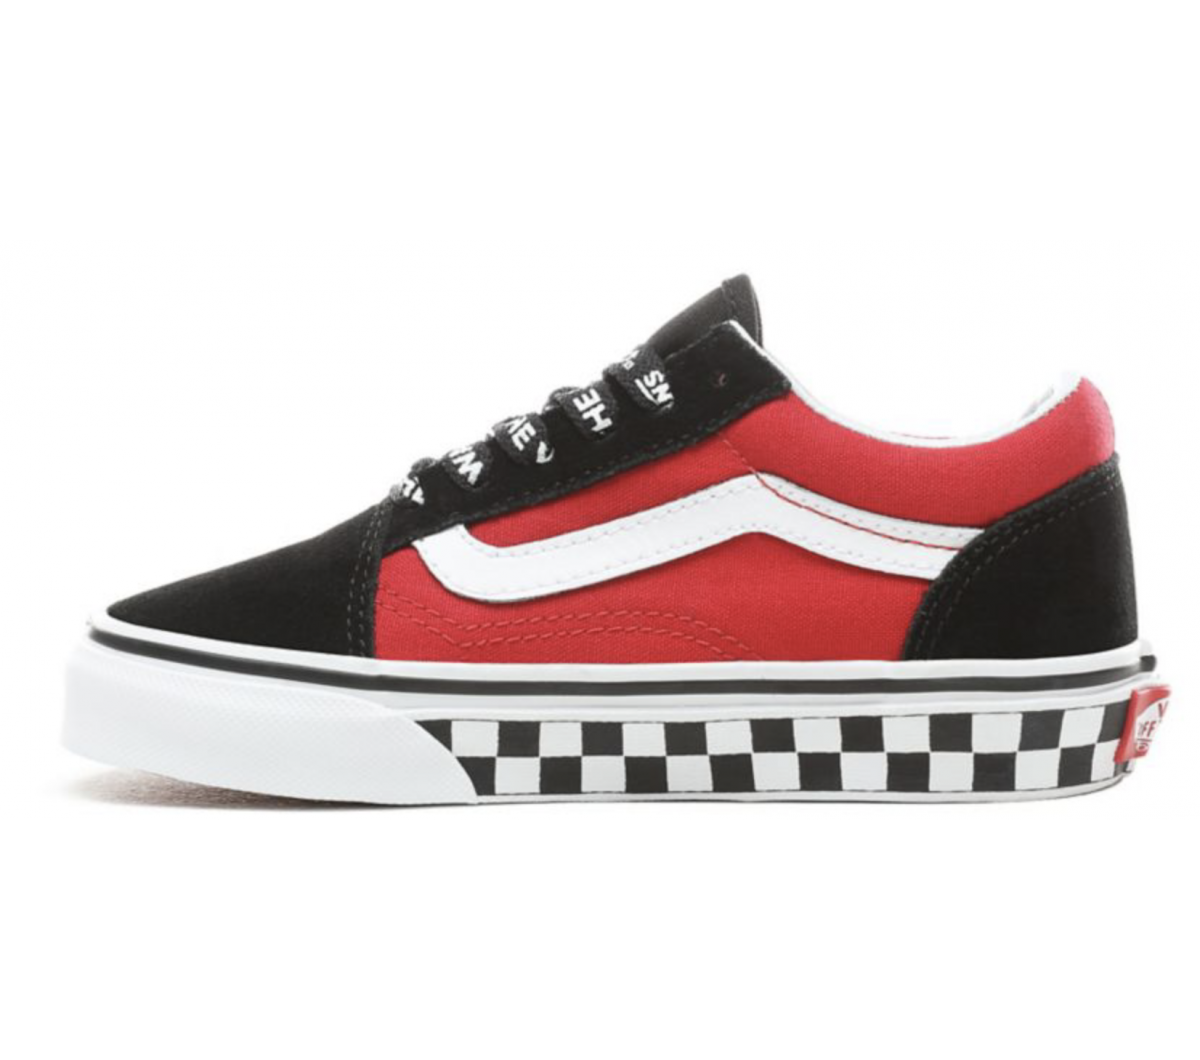 vans shoes for boys black and red